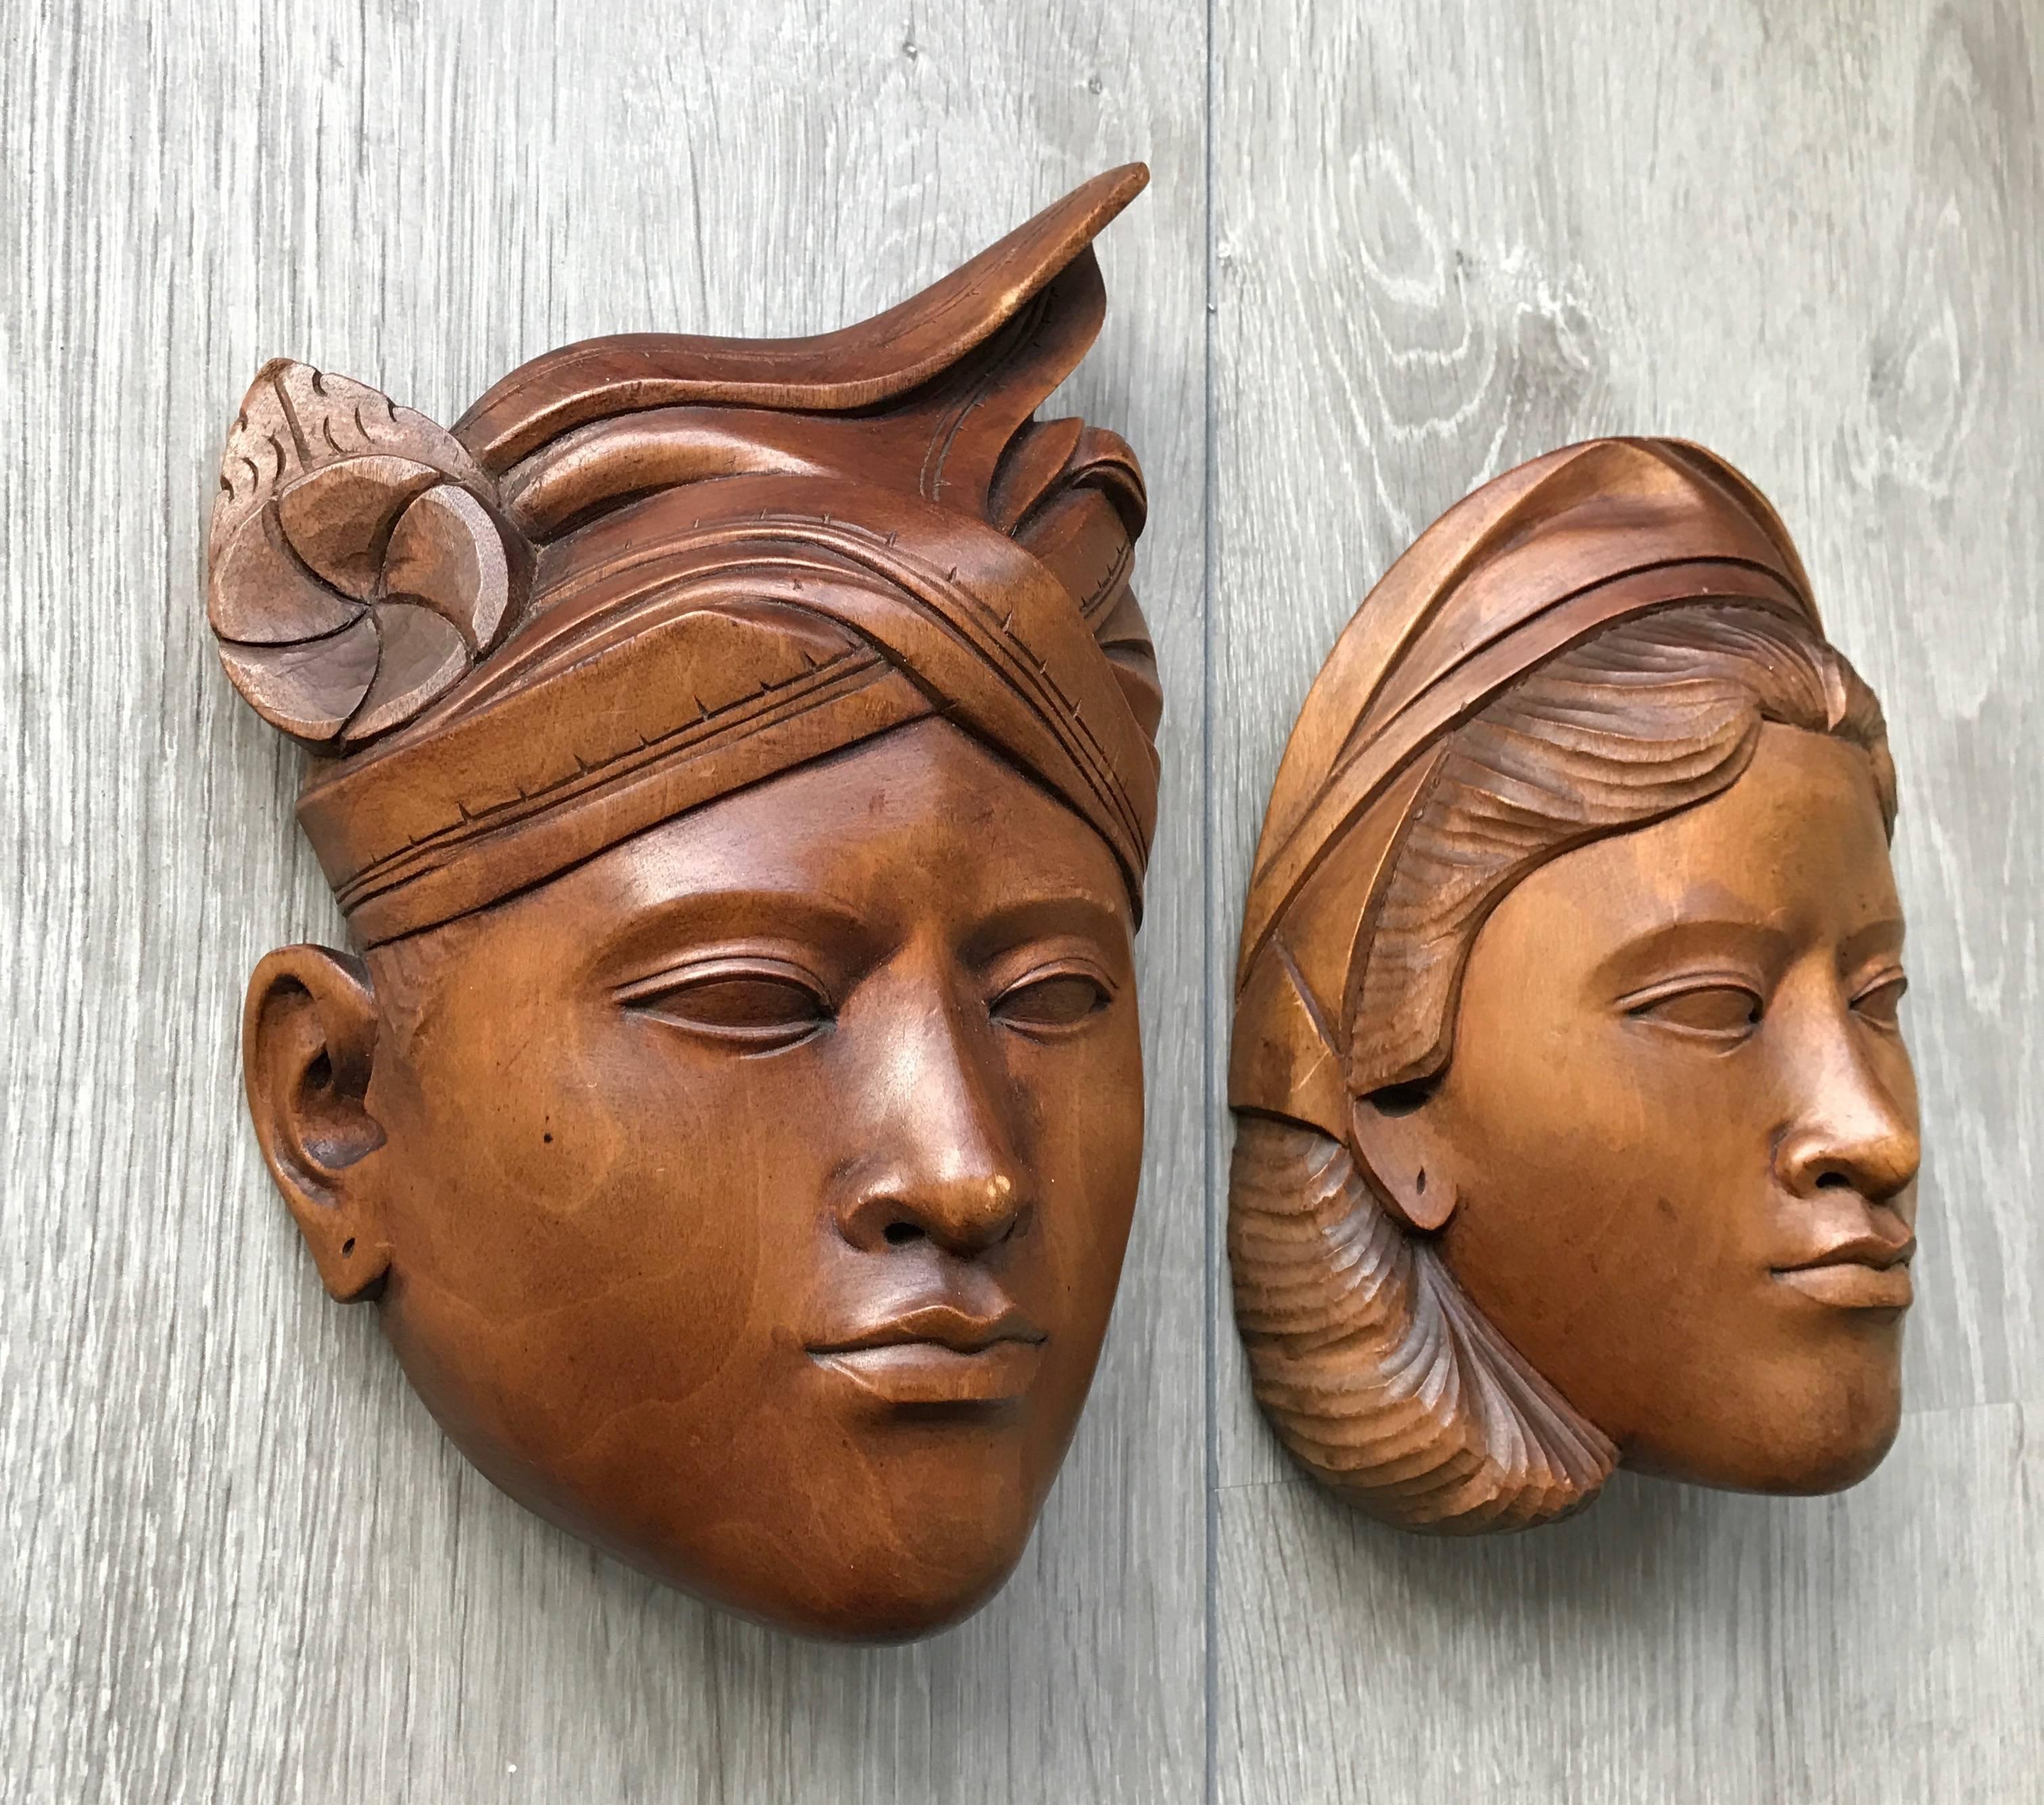 Decorative and handcrafted, solid wooden wall masks.

These skillfully carved masks date from the 1950s and they were most likely for and given to newlyweds. These well carved face masks can be compared with wedding pictures only these 'wooden